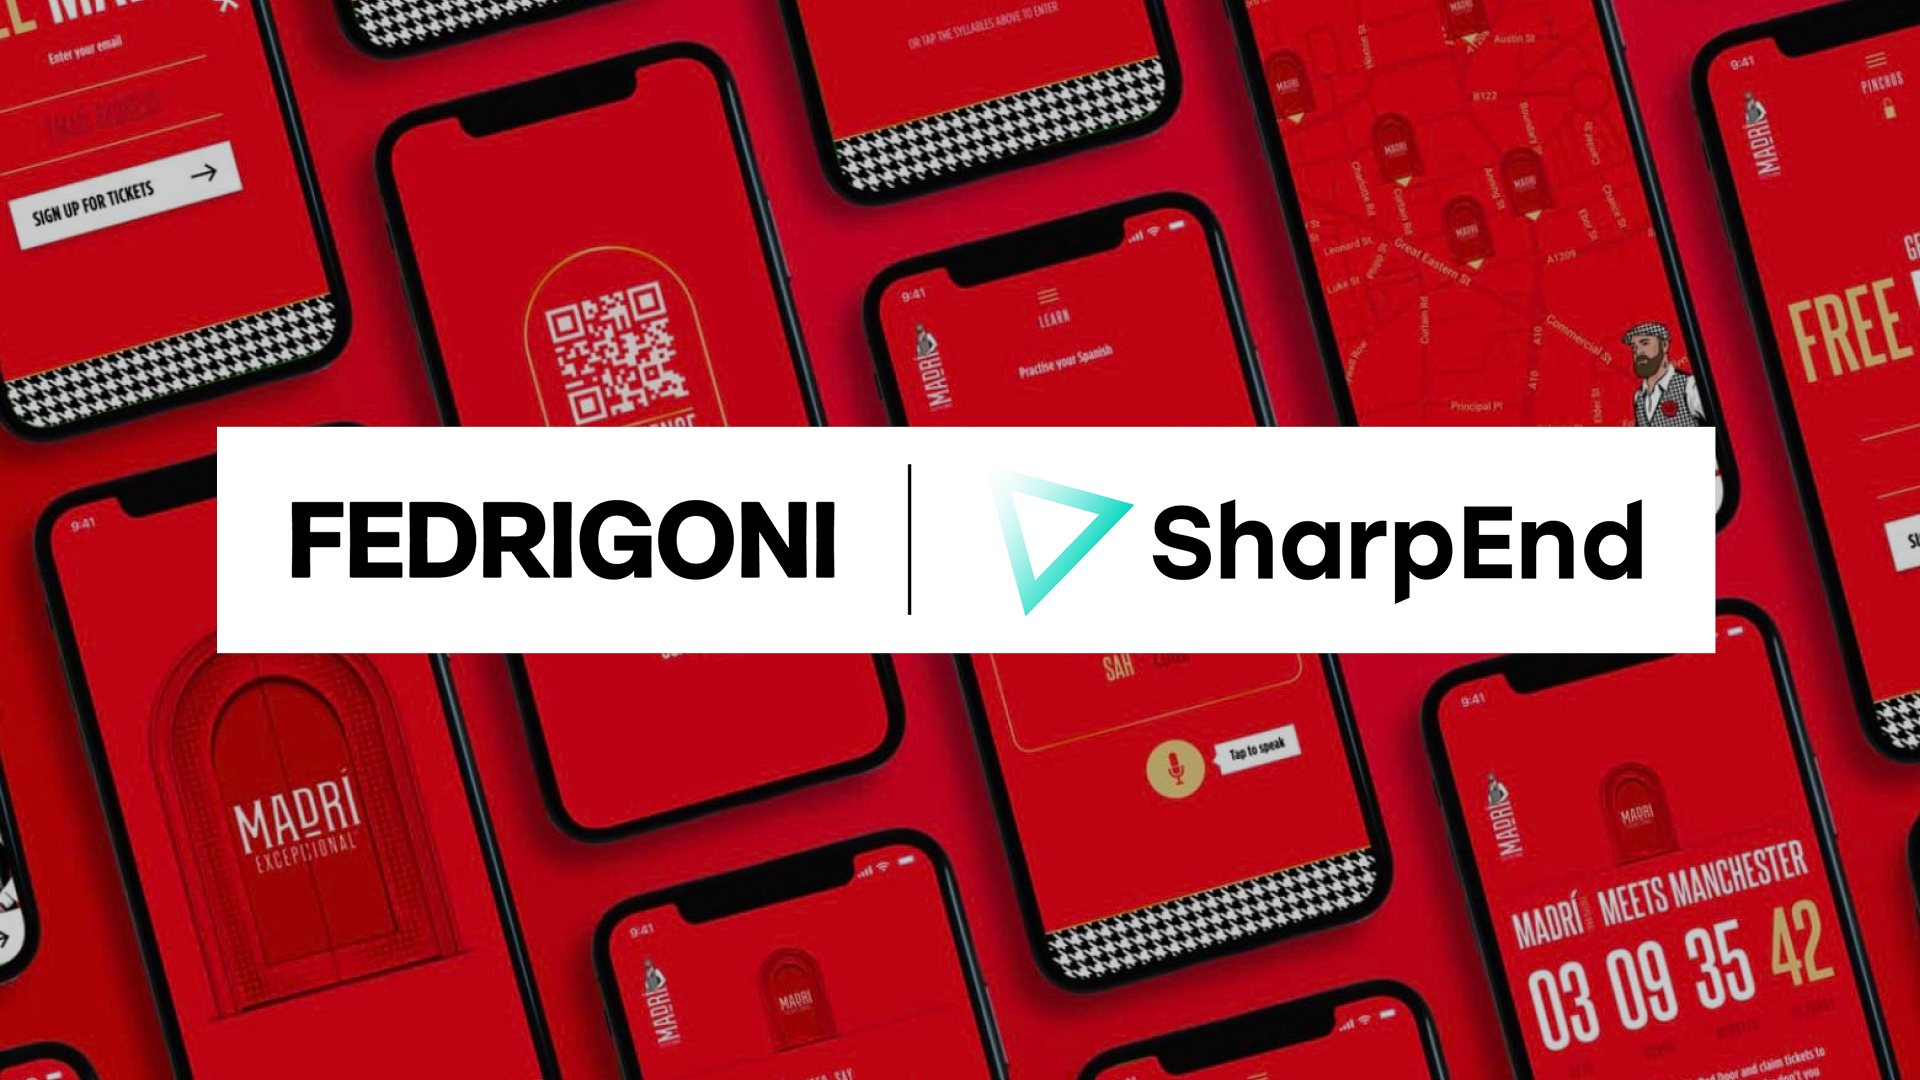 Fedrigoni Group Invests in SharpEnd for Cutting-Edge Connected Solutions